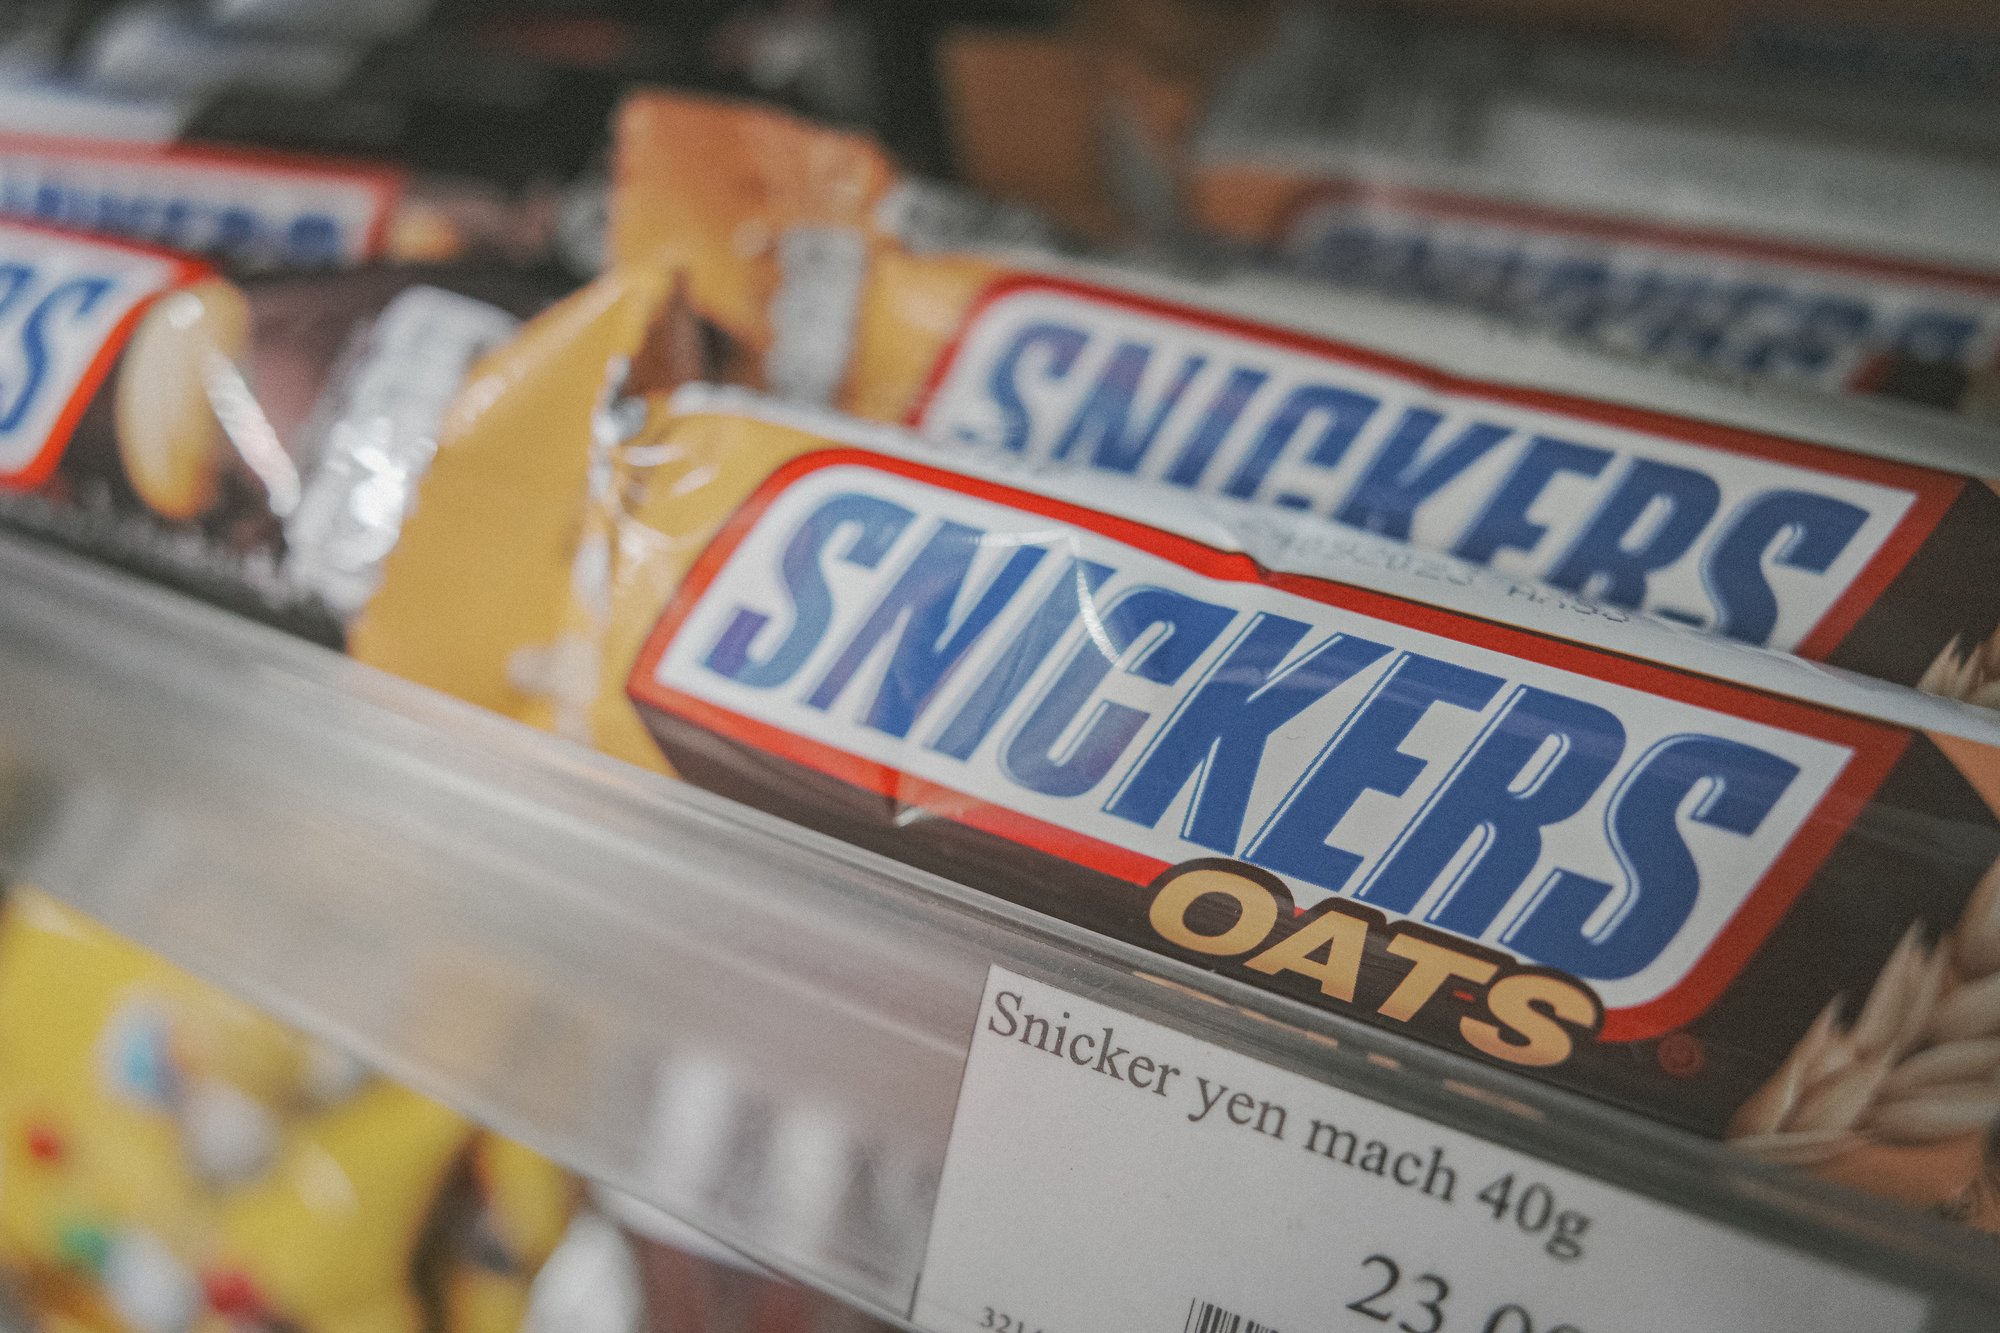 Snickers Oats